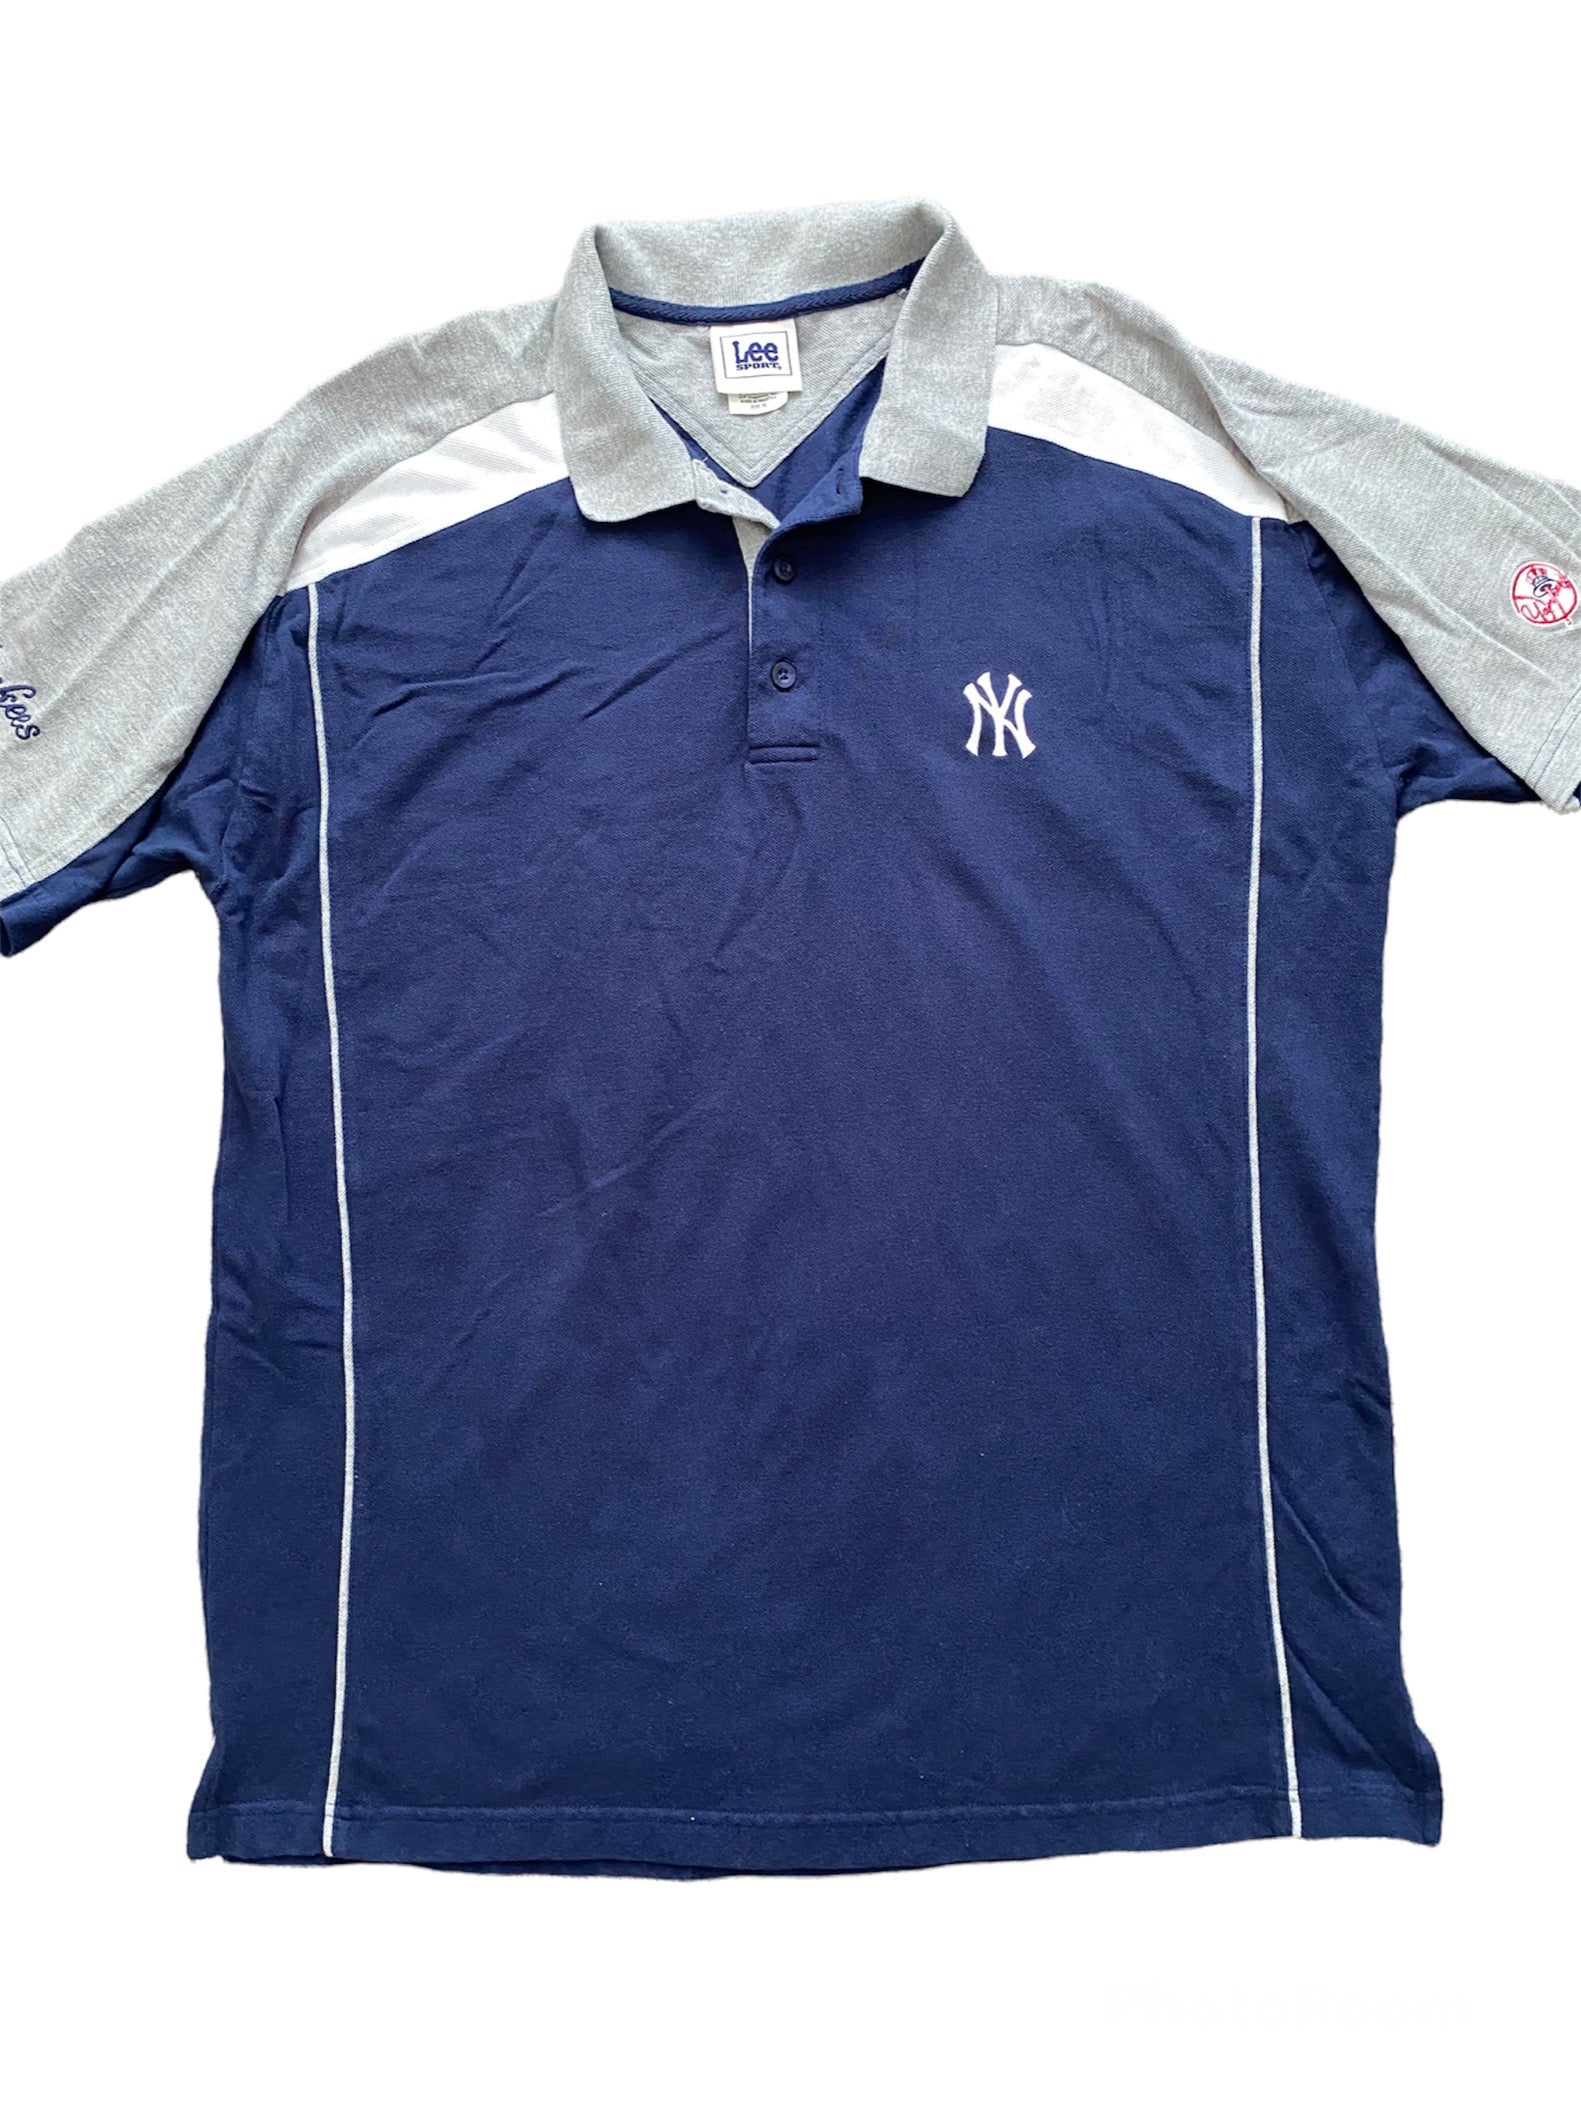 Vintage 90's Lee Sport New York Yankees Polo Shirt Size Large